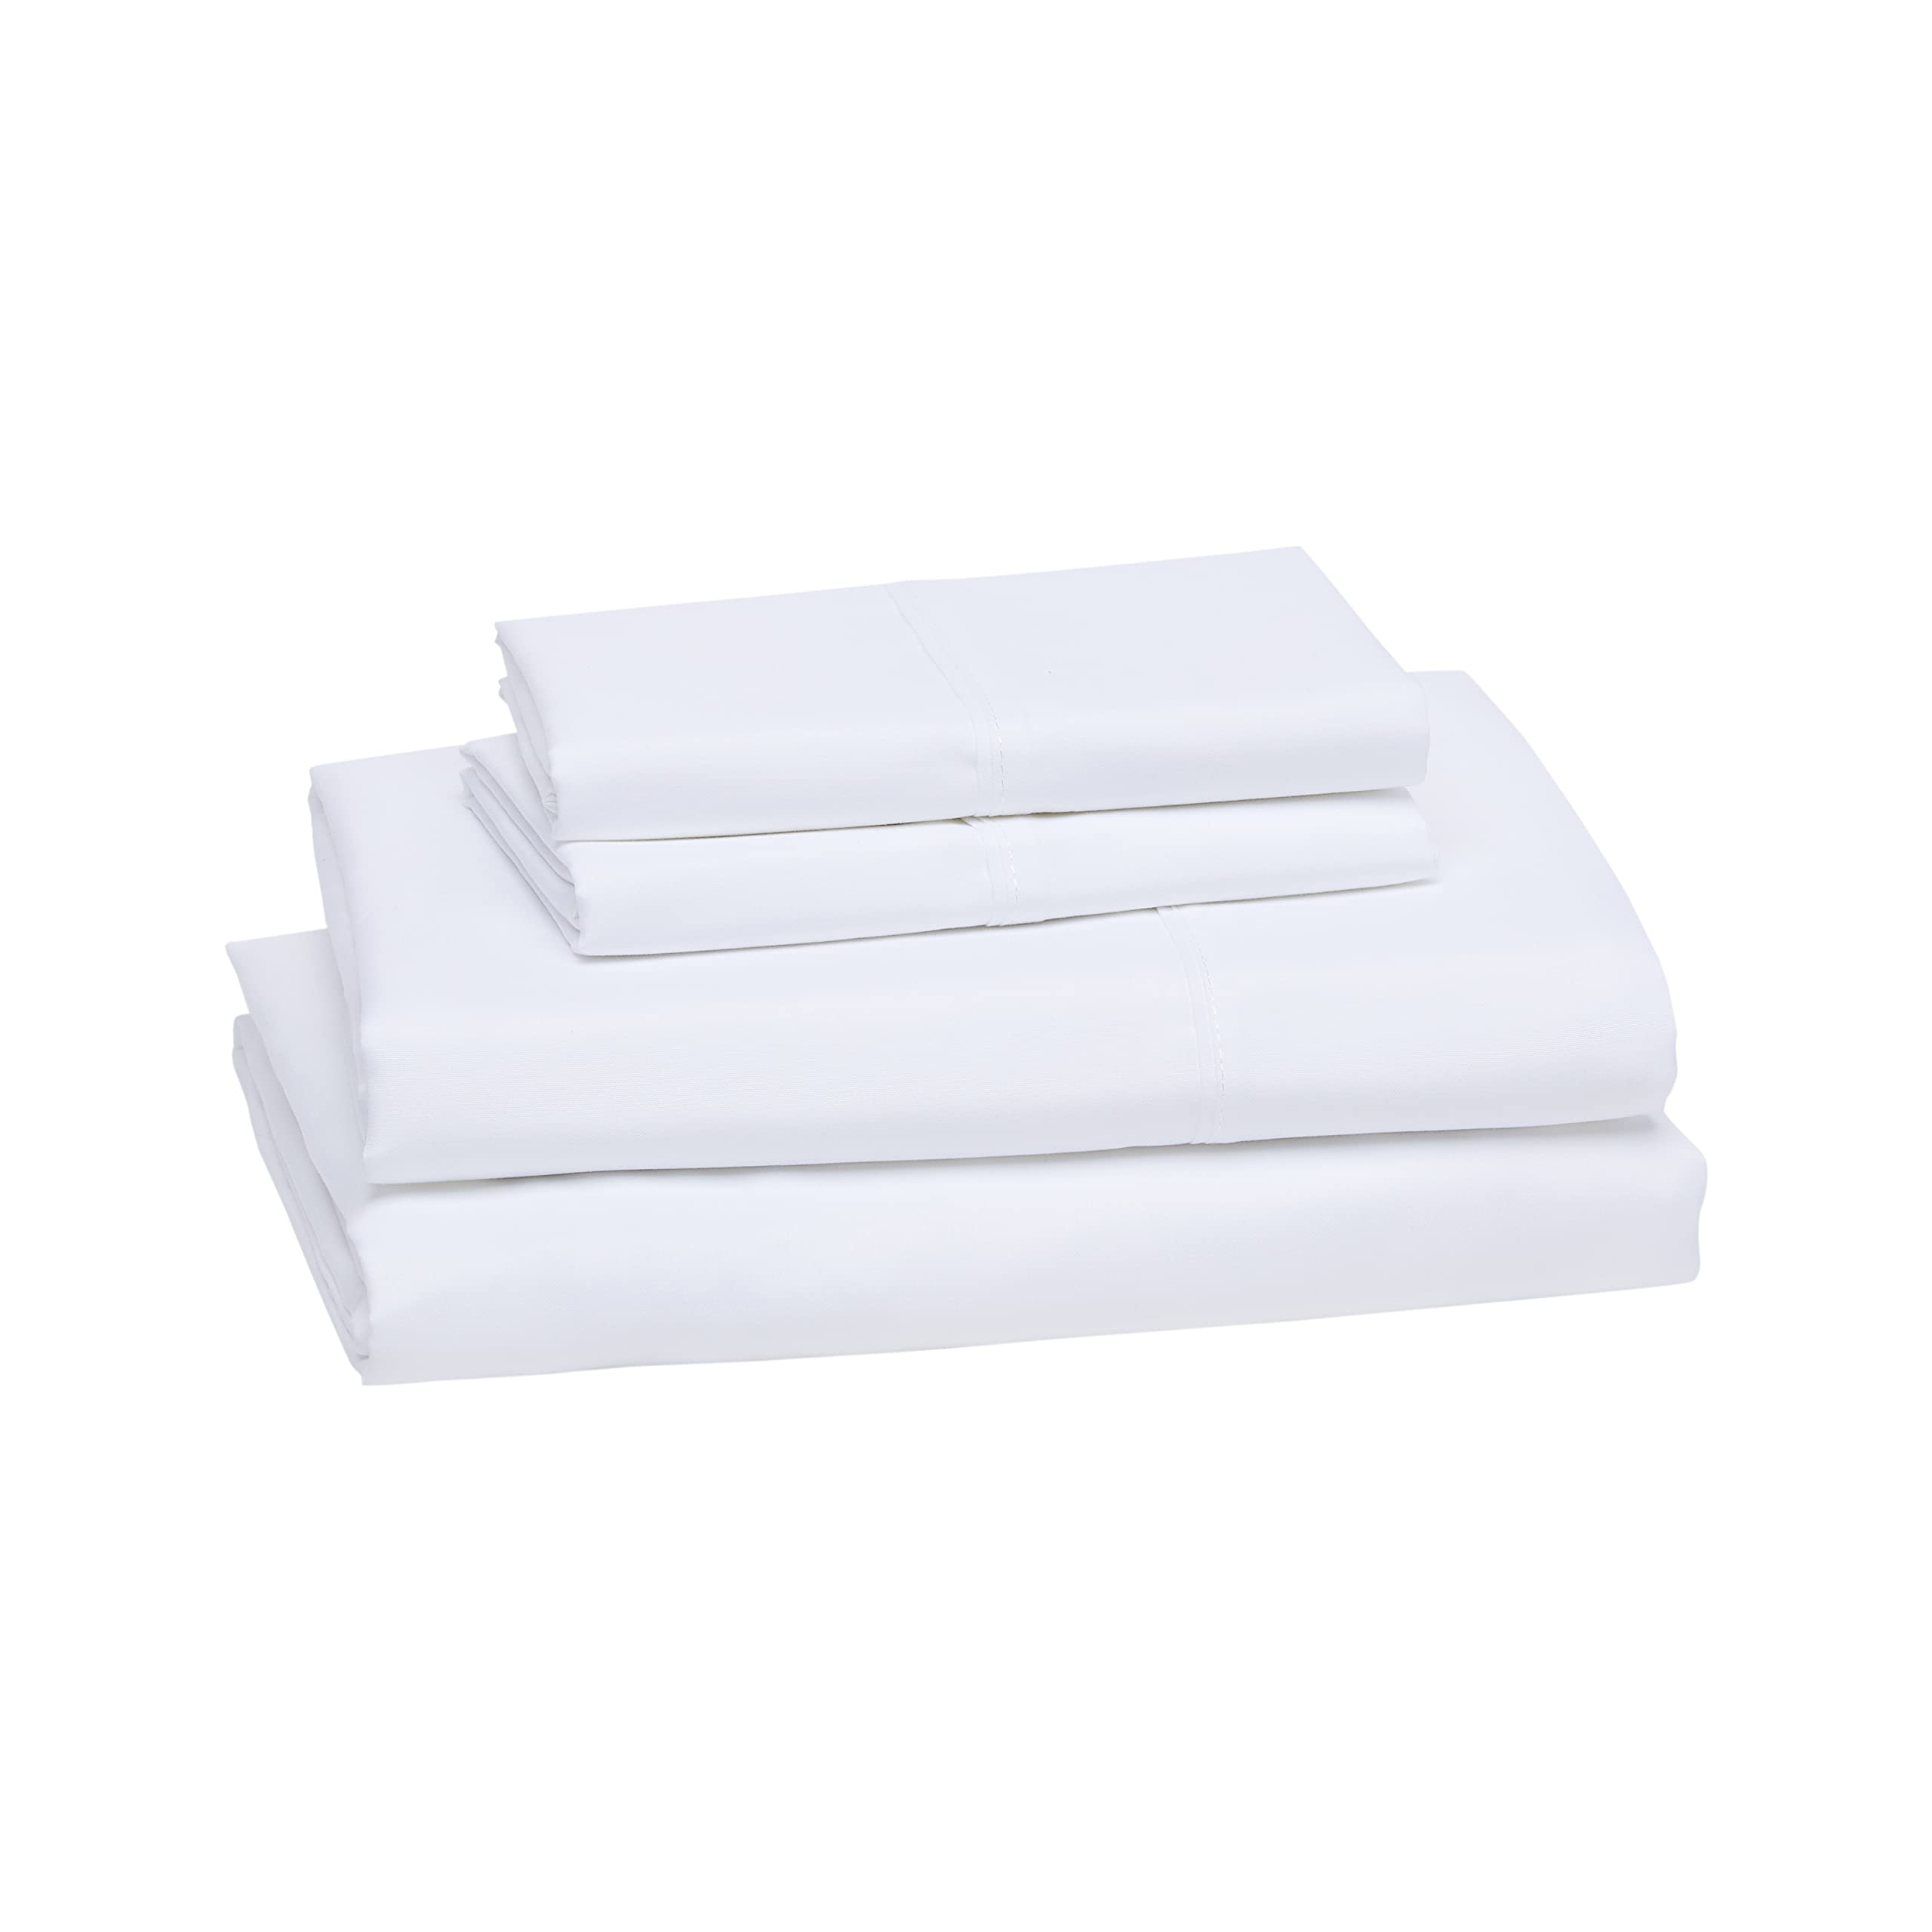 Book Cover Amazon Basics Lightweight Super Soft Easy Care Microfiber 4 Piece Bed Sheet Set With 14-Inch Deep Pockets, Queen, Bright White, Solid Queen Sheet Set Bright White